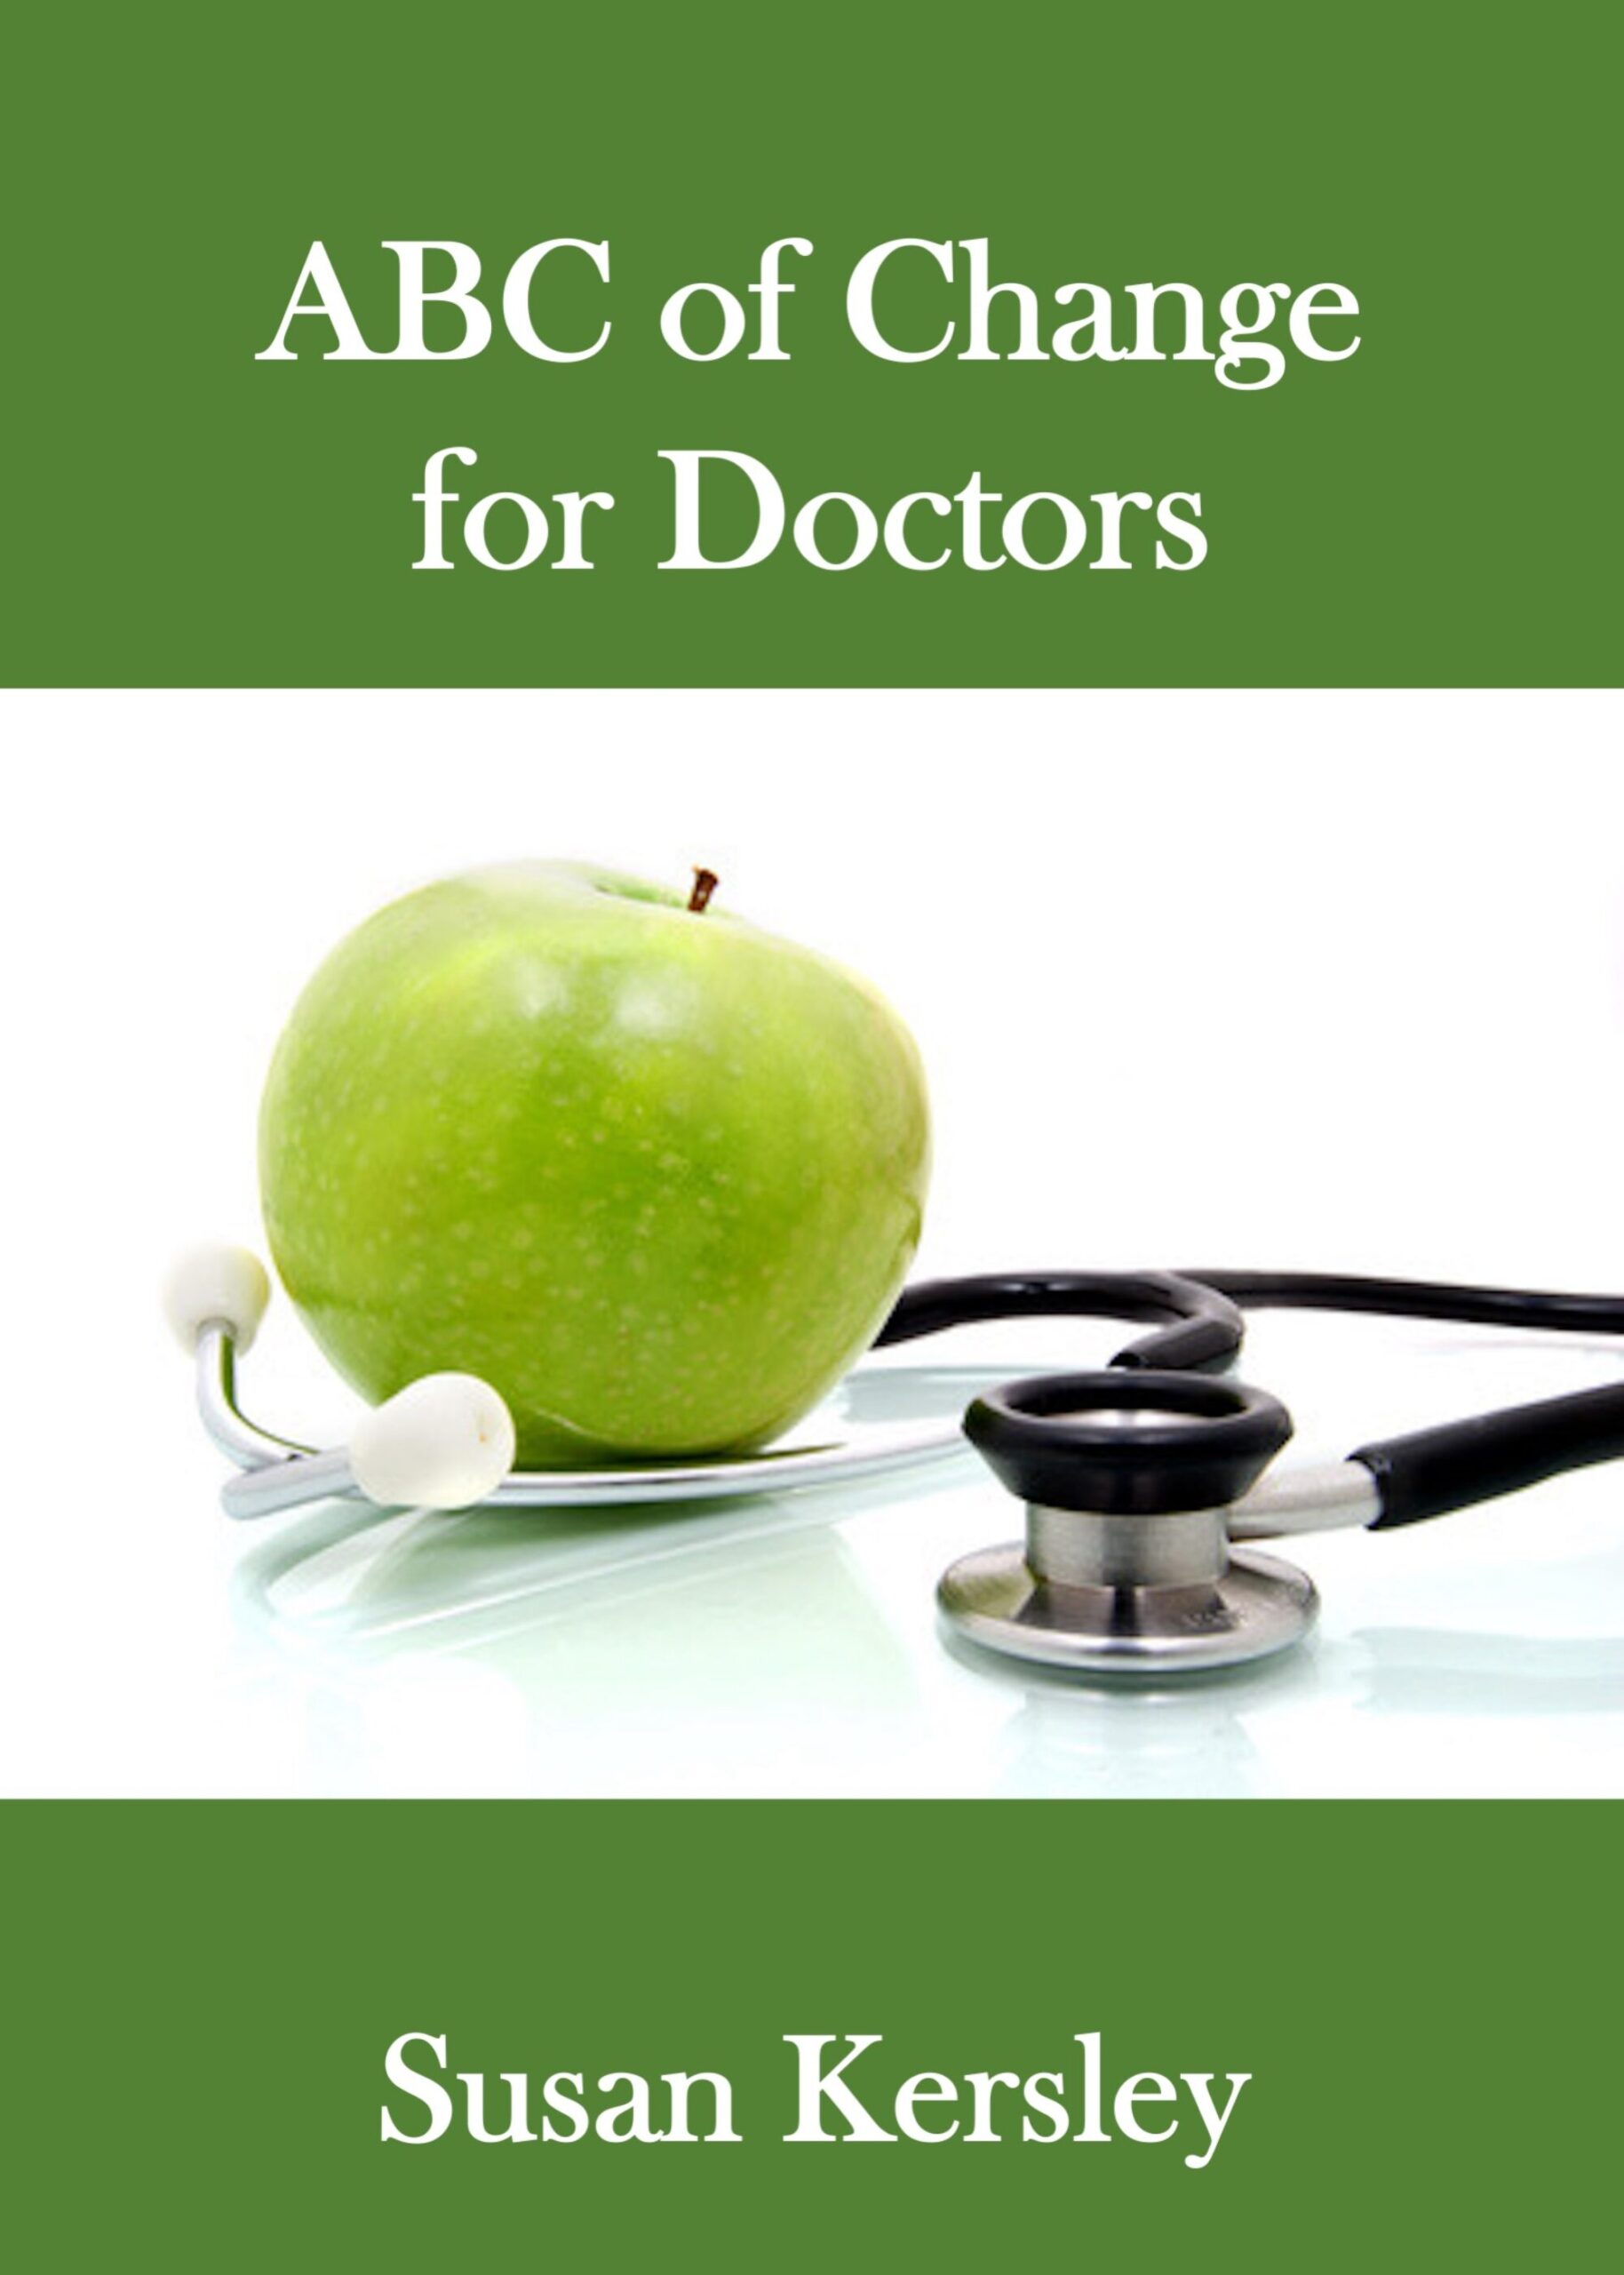 Books for Doctors, books for you...